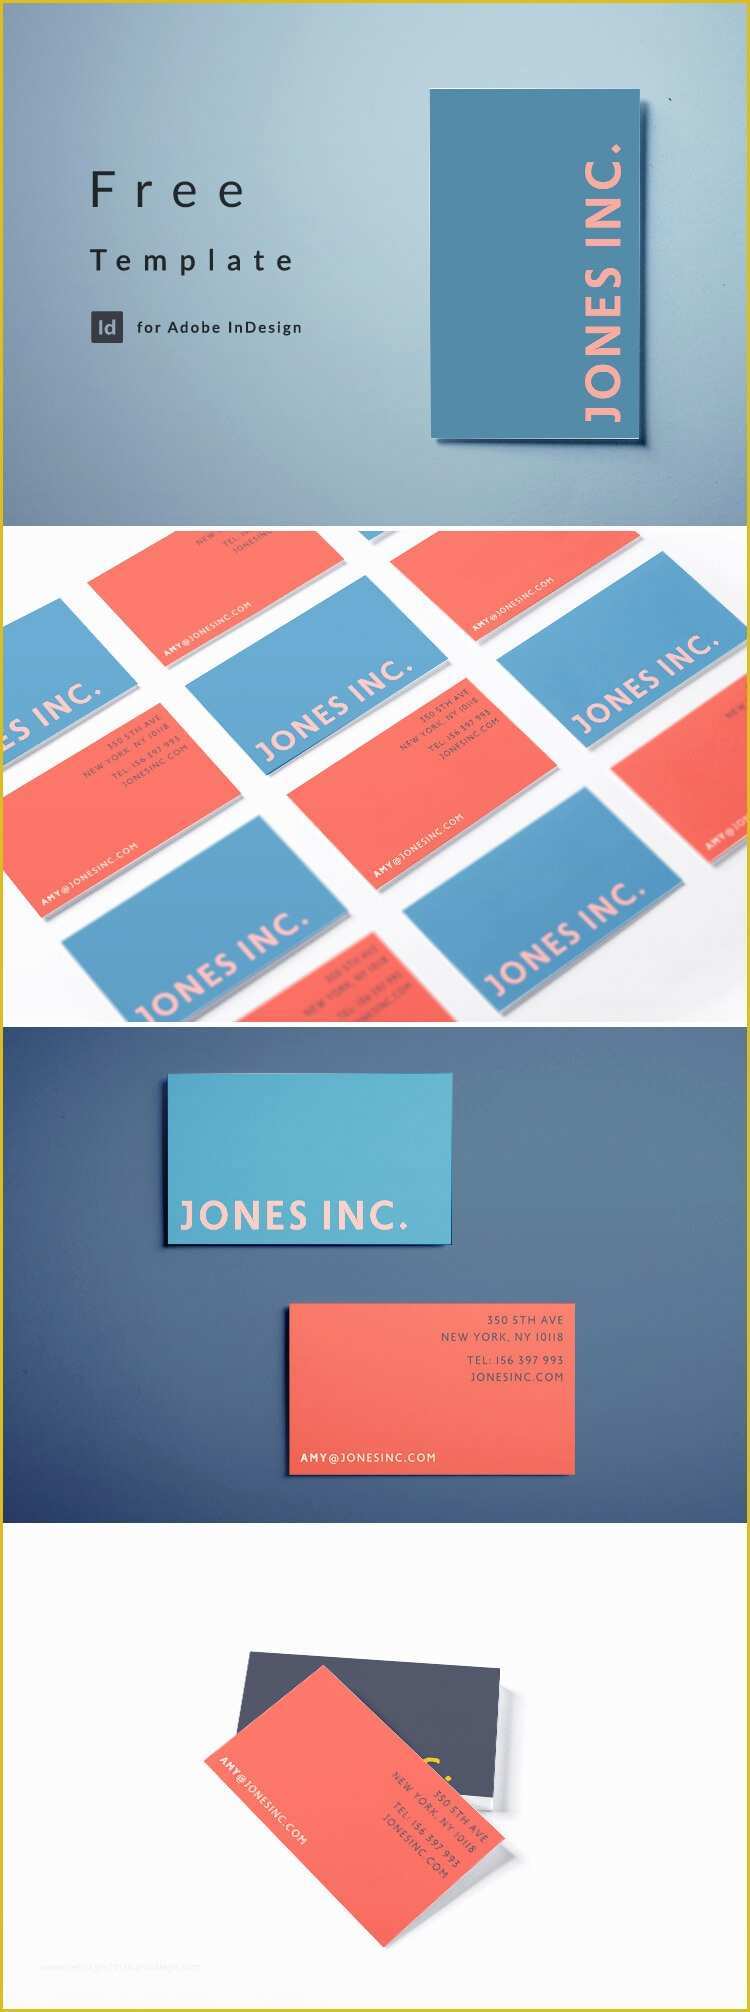 Indesign Business Card Template Free Of Free Indesign Business Card Template with A Bold Modern